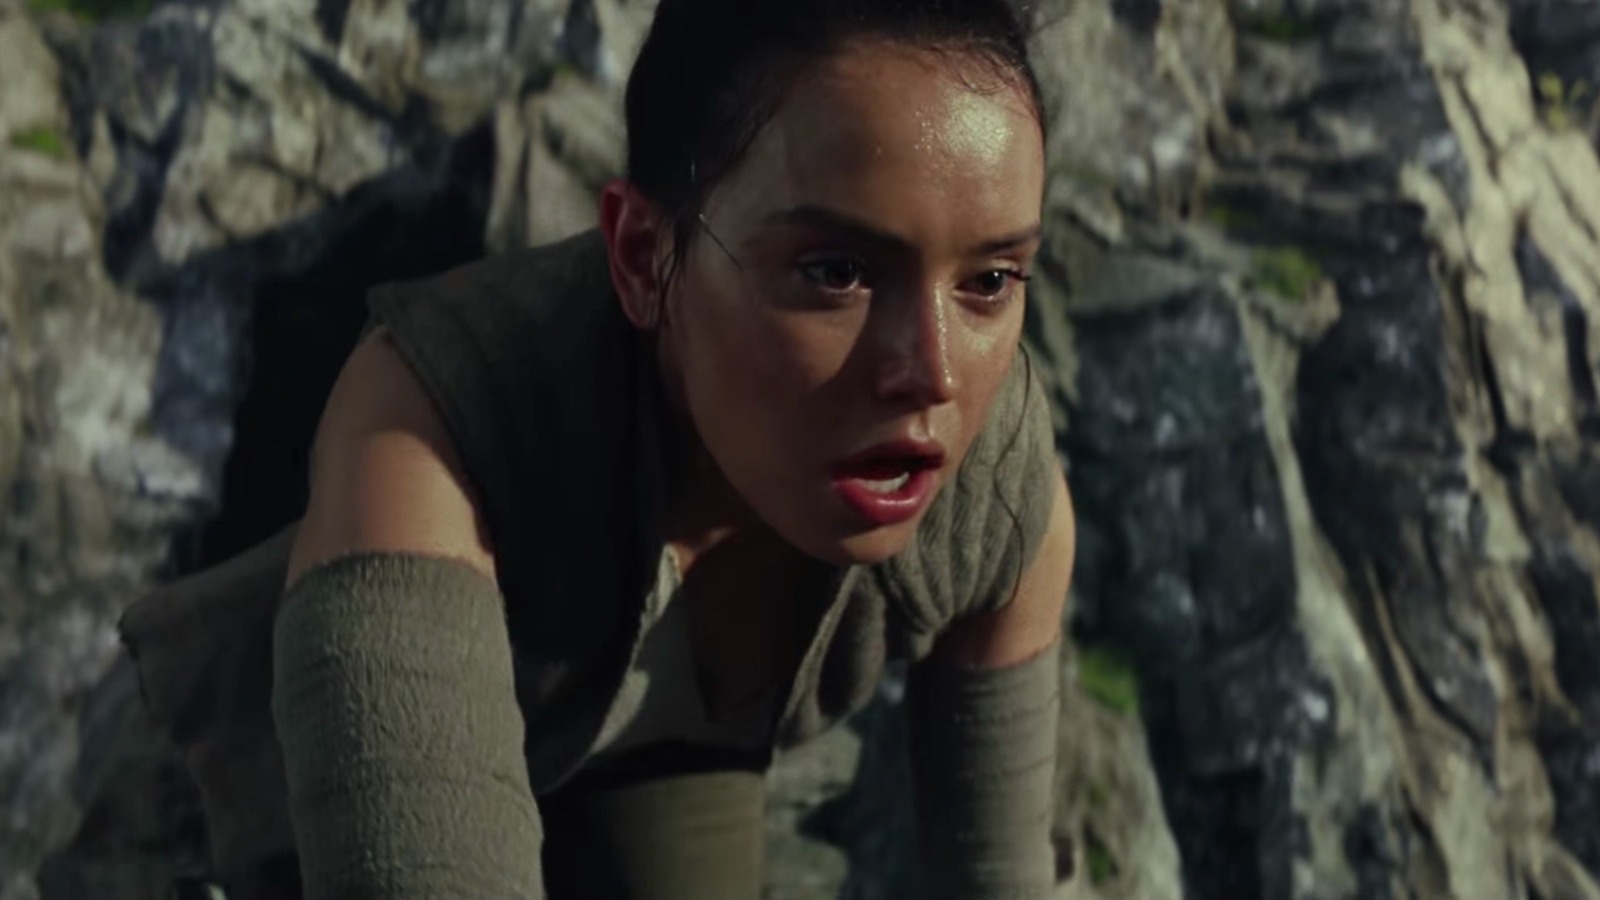 Star Wars: The Last Jedi Used a Magical Medical Device to Help Train Actors